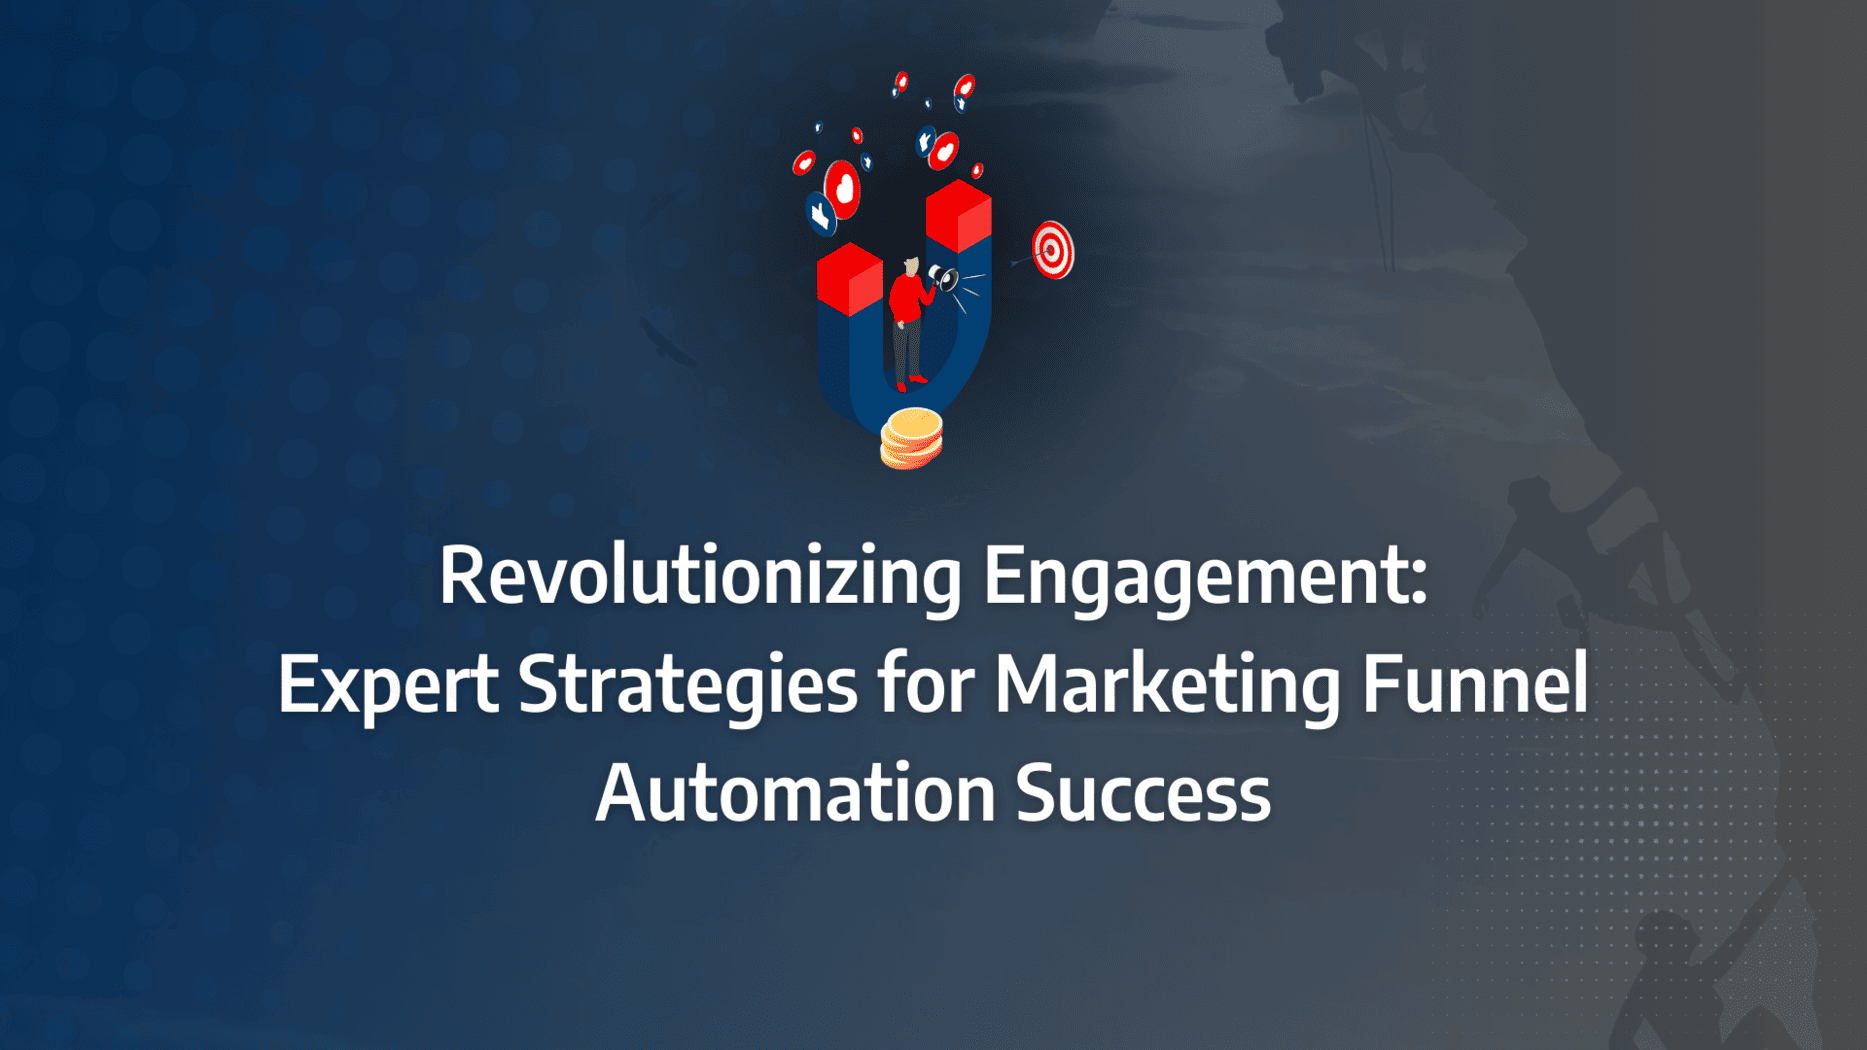 Strategies for Automating Your Marketing Funnel to Optimise Sales Campaign Performance: strategy framework diagram for marketing funnel automation, traditional marketing funnel, marketing automation workflows, sales funnel marketing automation, marketing automation tools